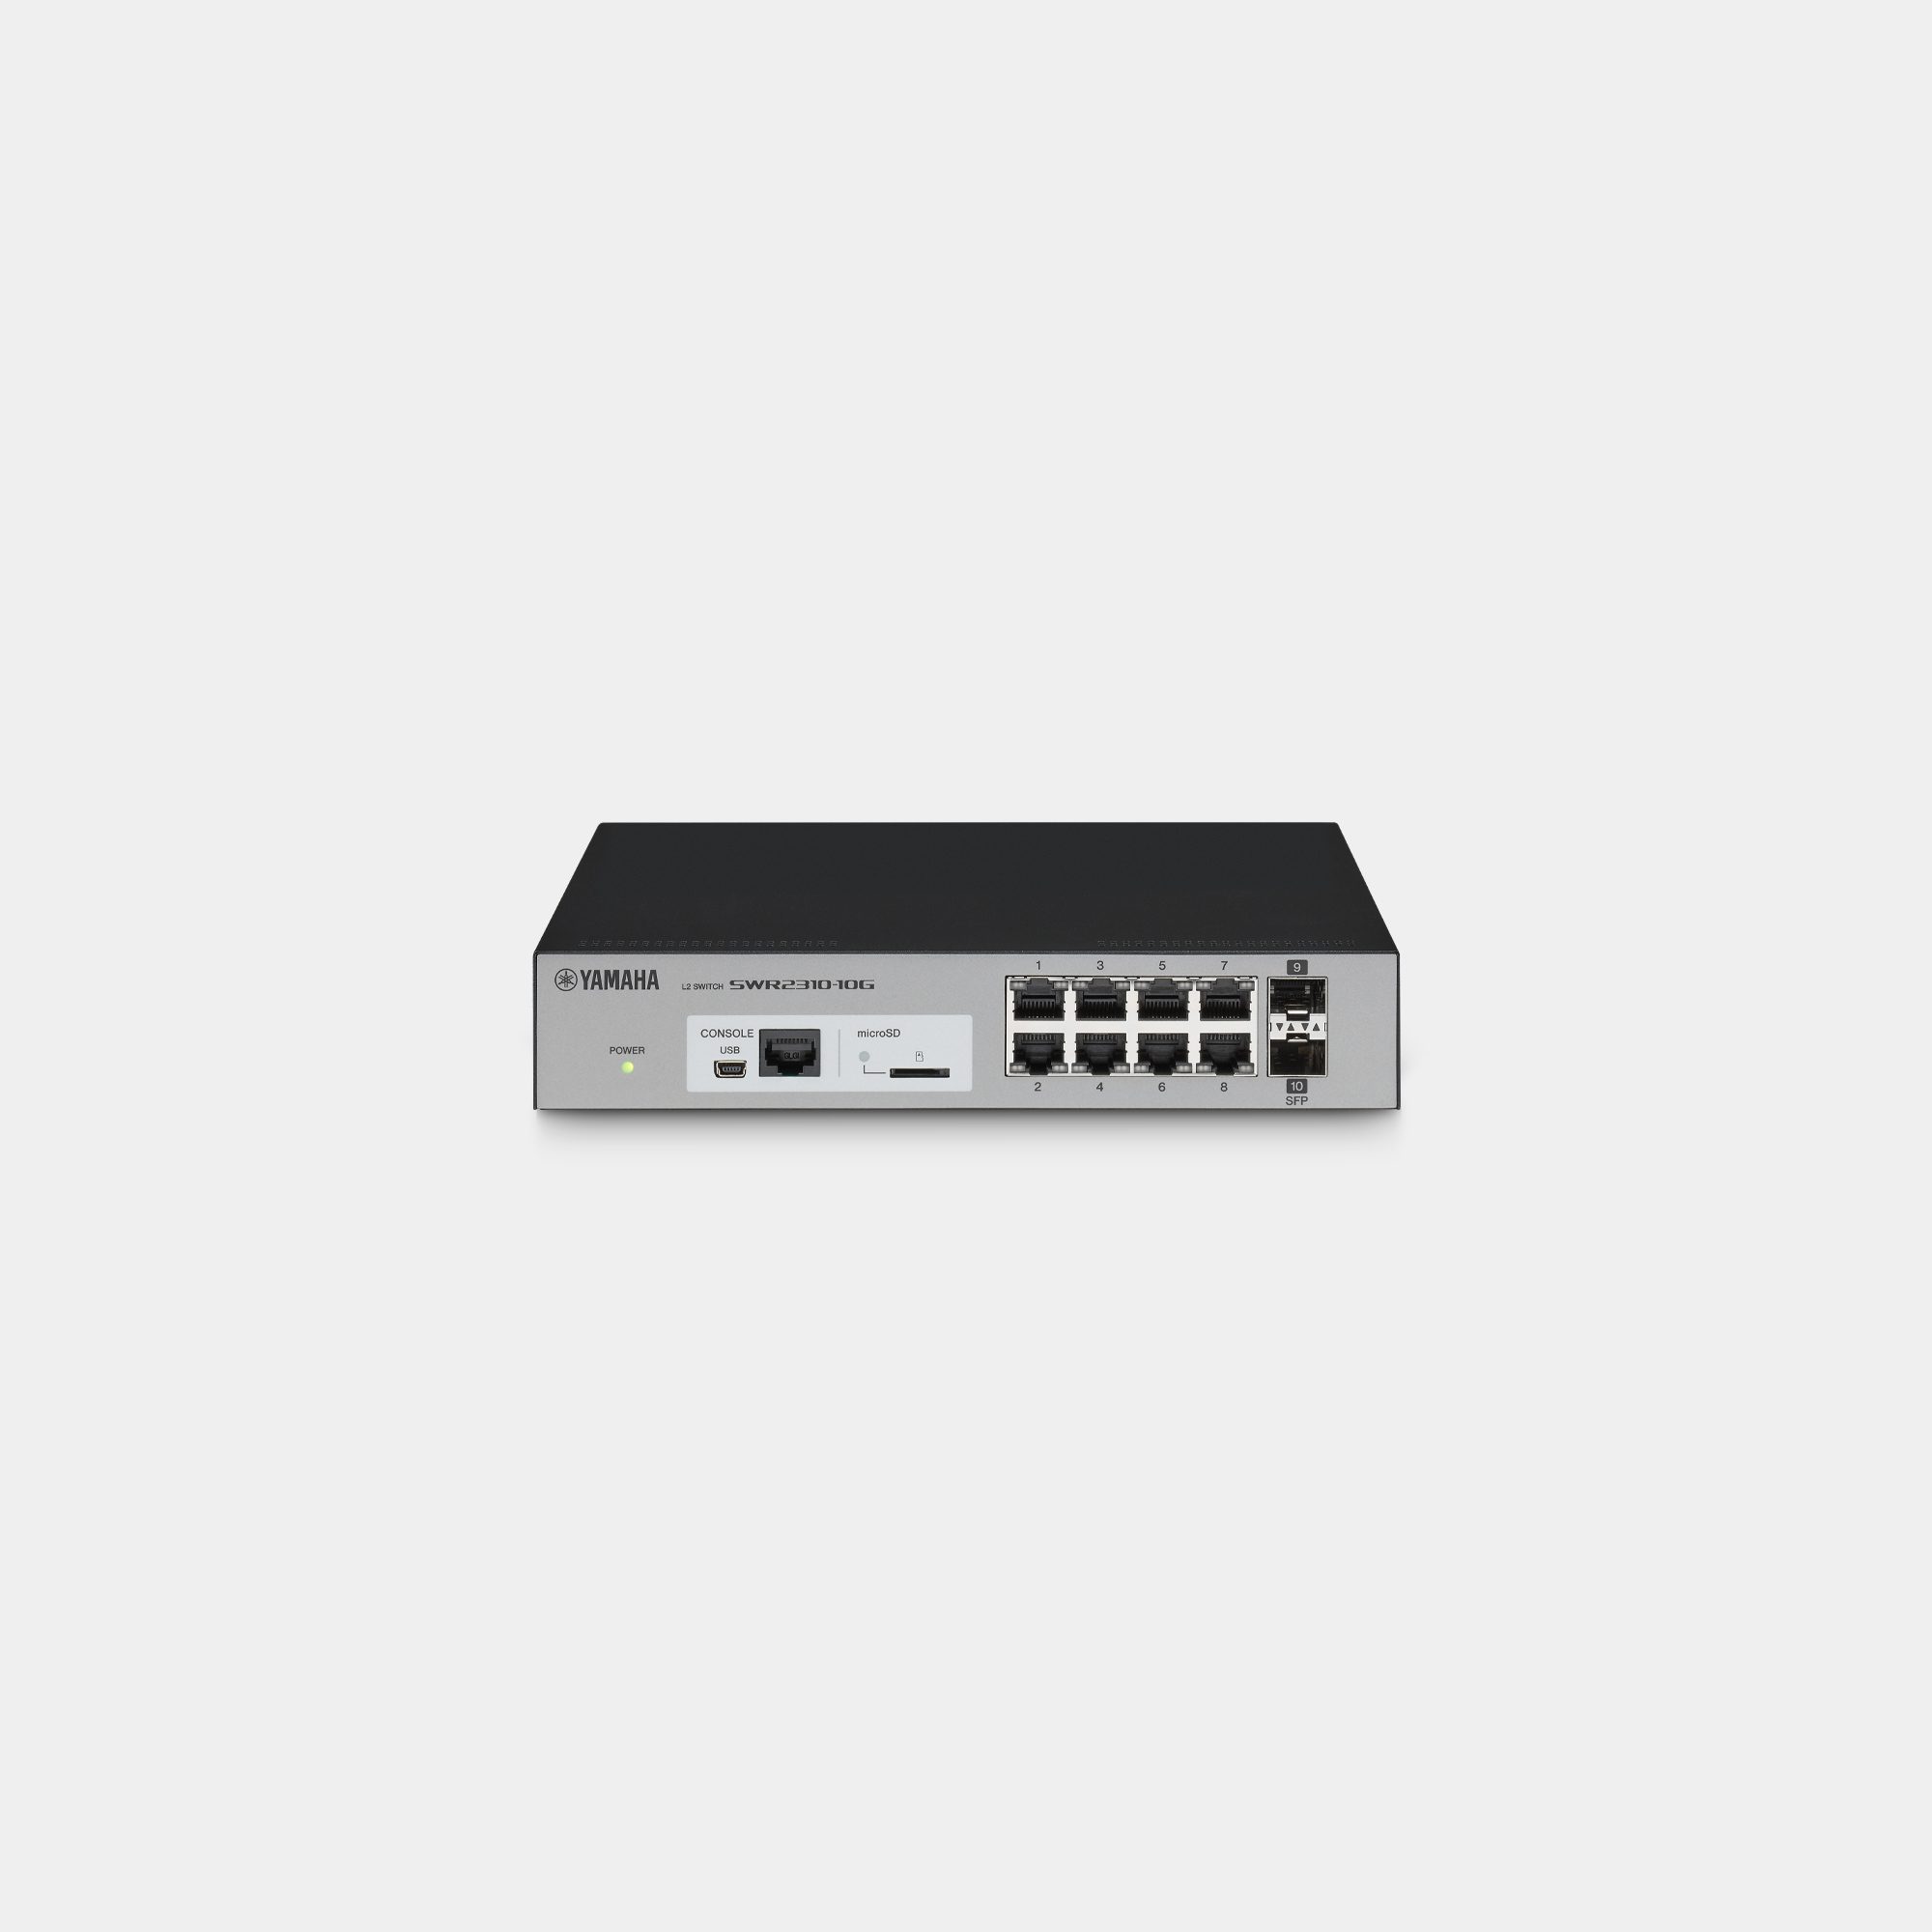 SWR2310 - Overview - Network Switches - Professional Audio 